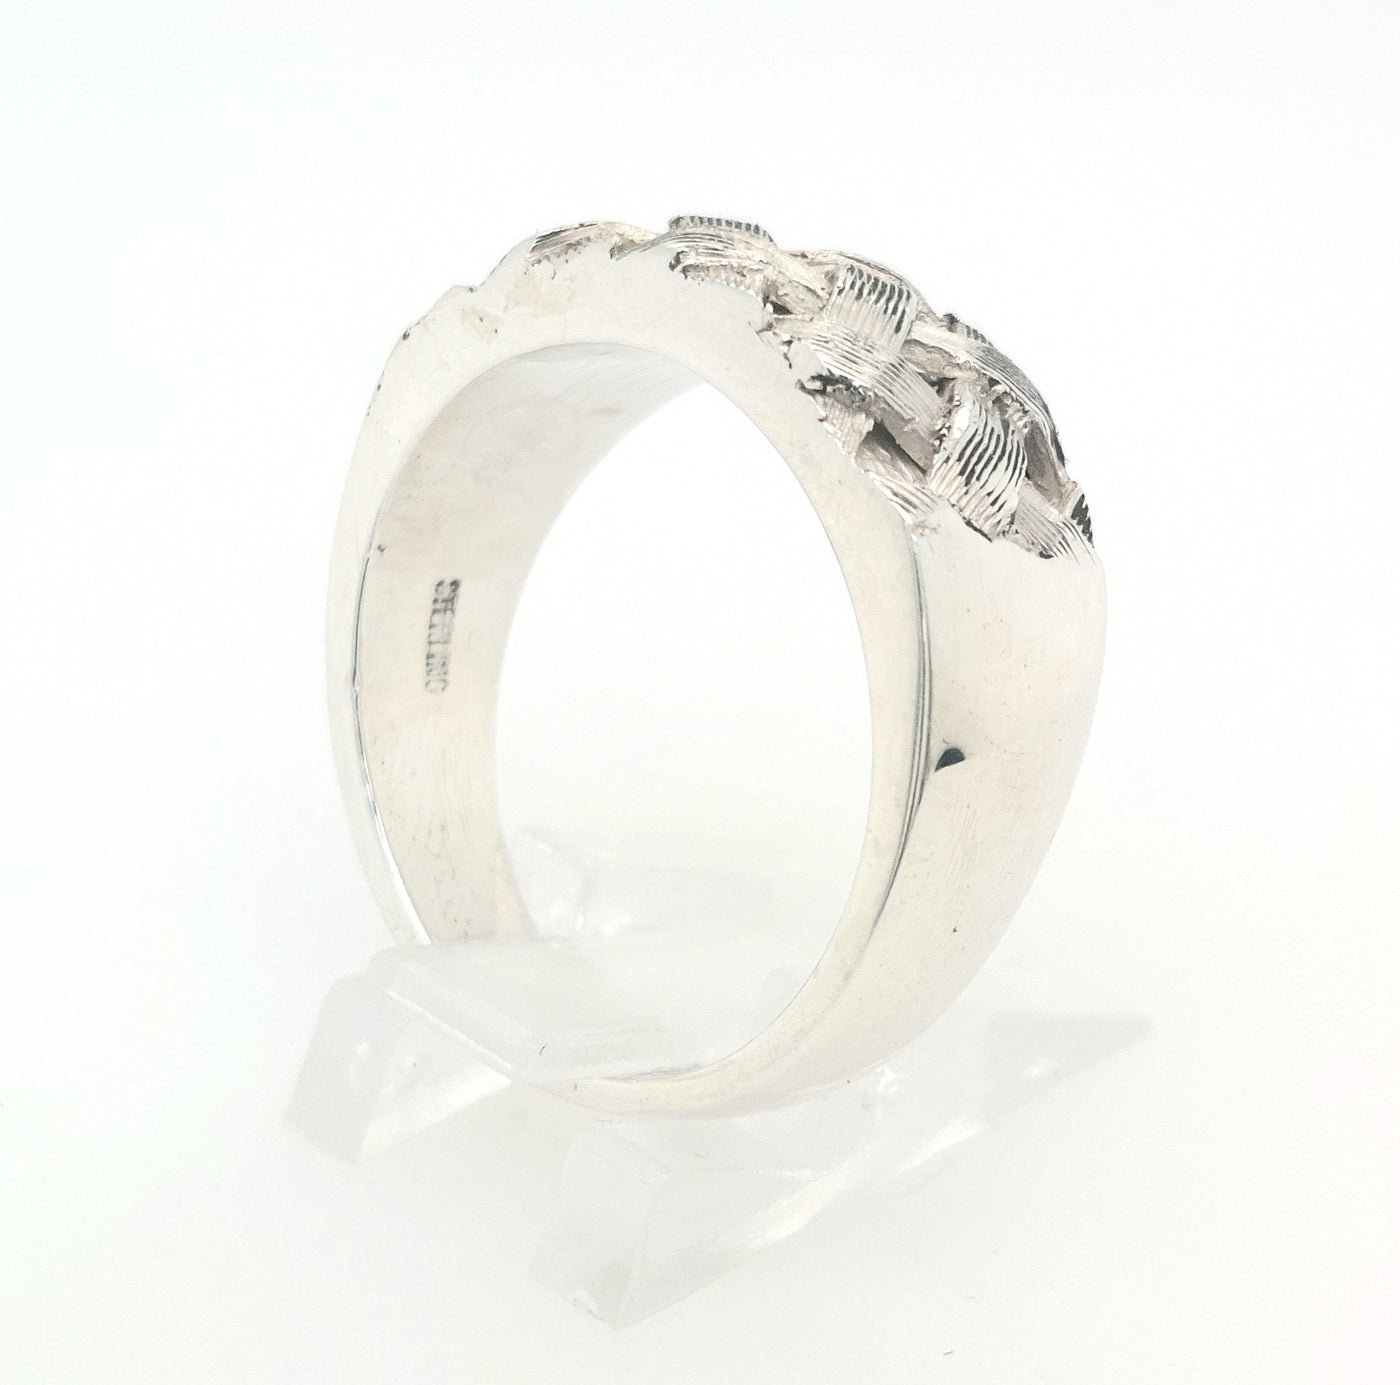 SS Recessed Woven Design Ring Size:10.25